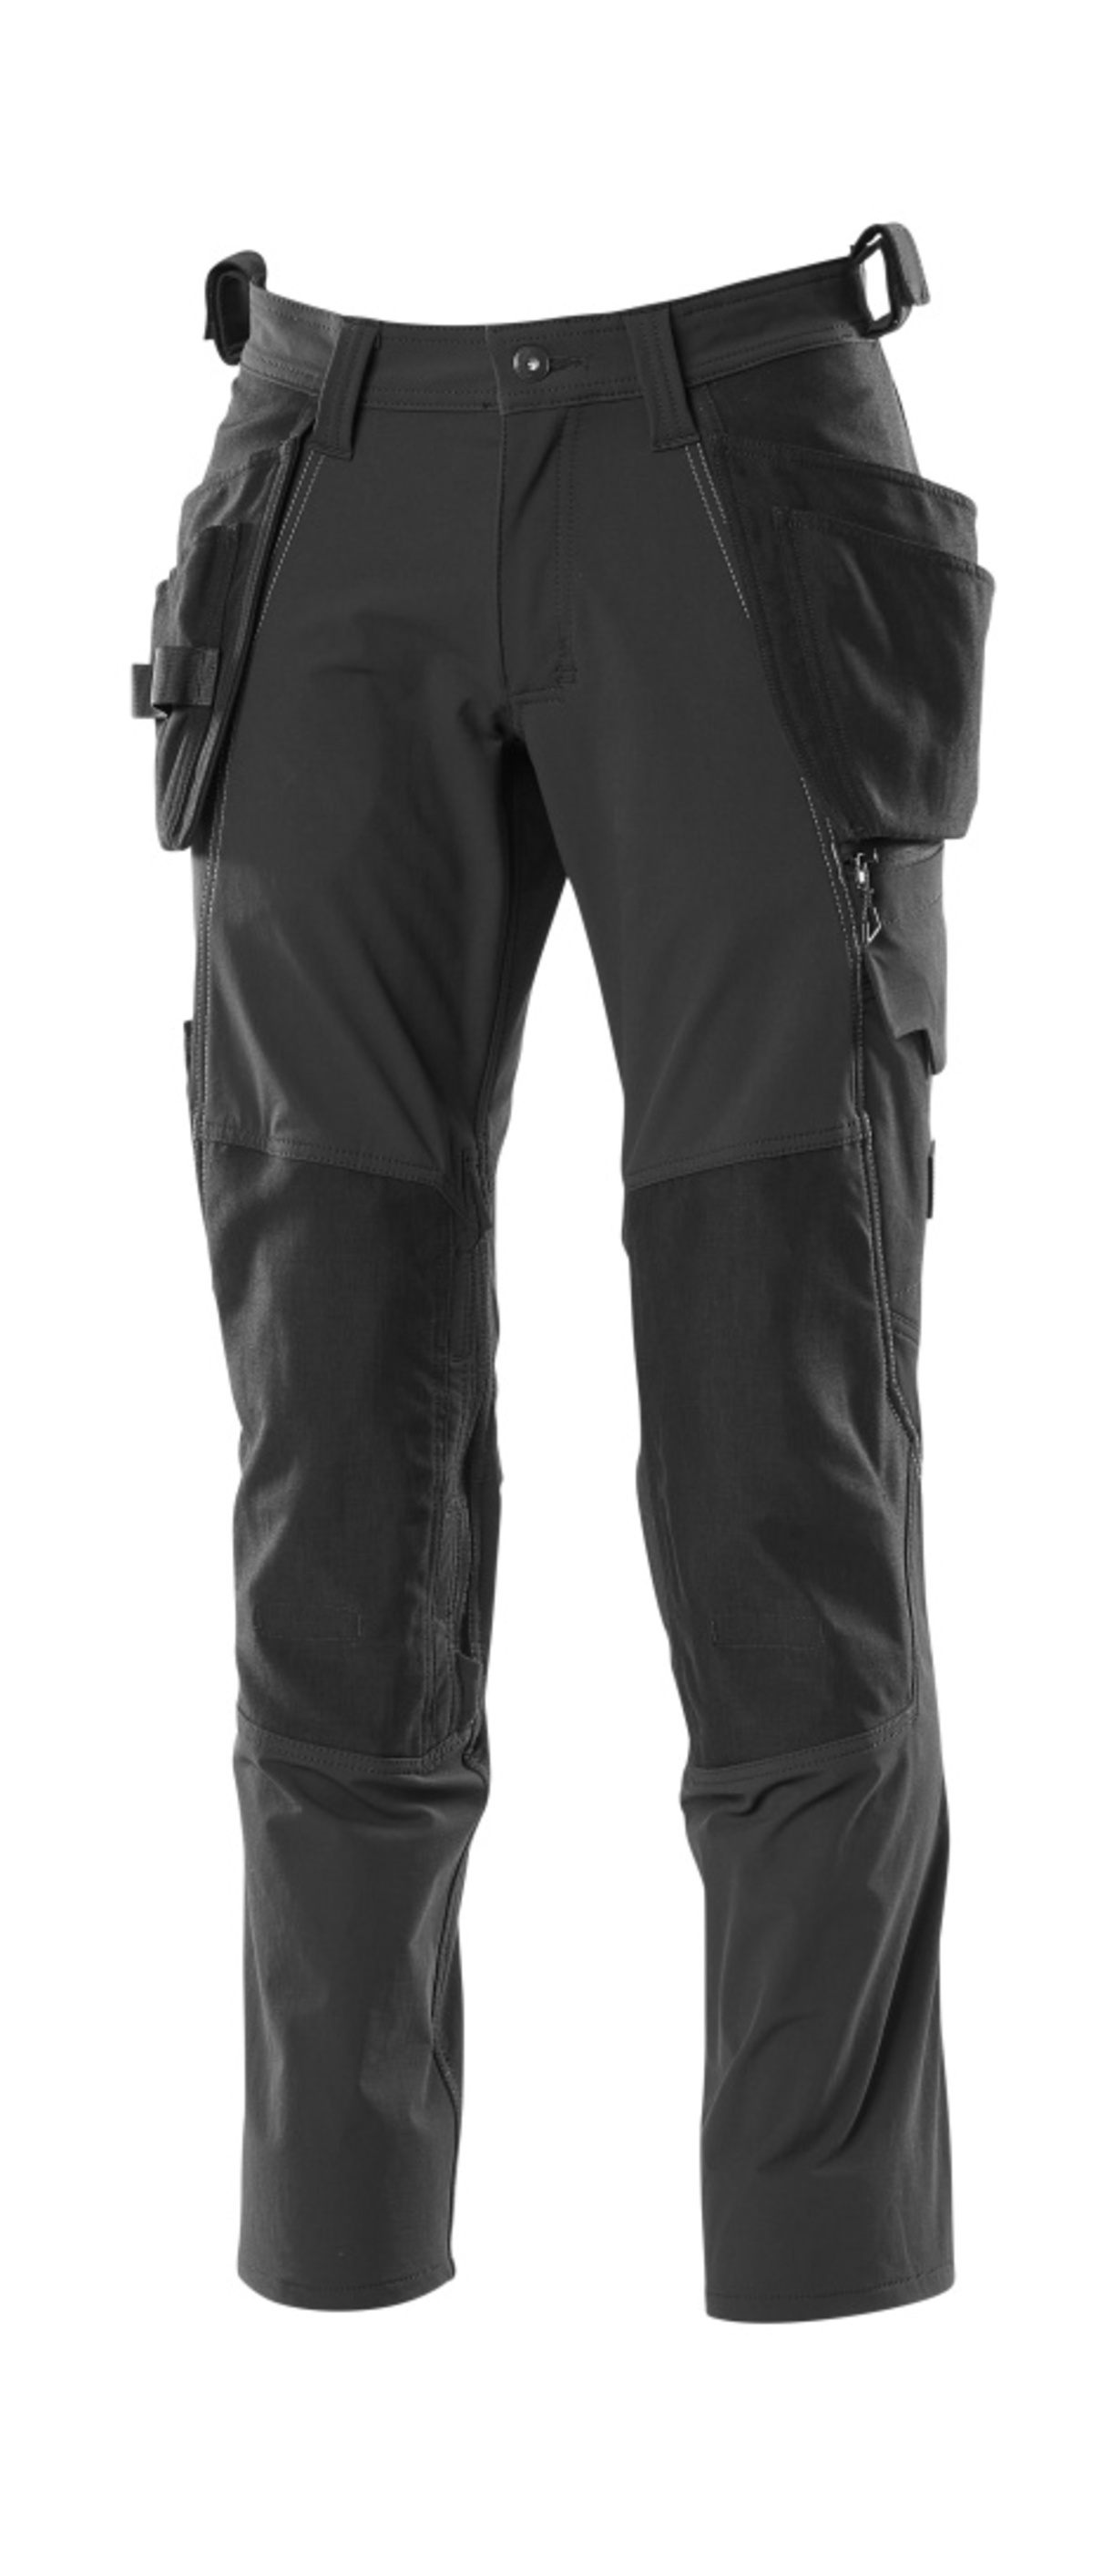 Mascot Accelerate Trousers with Holster Pockets - Black